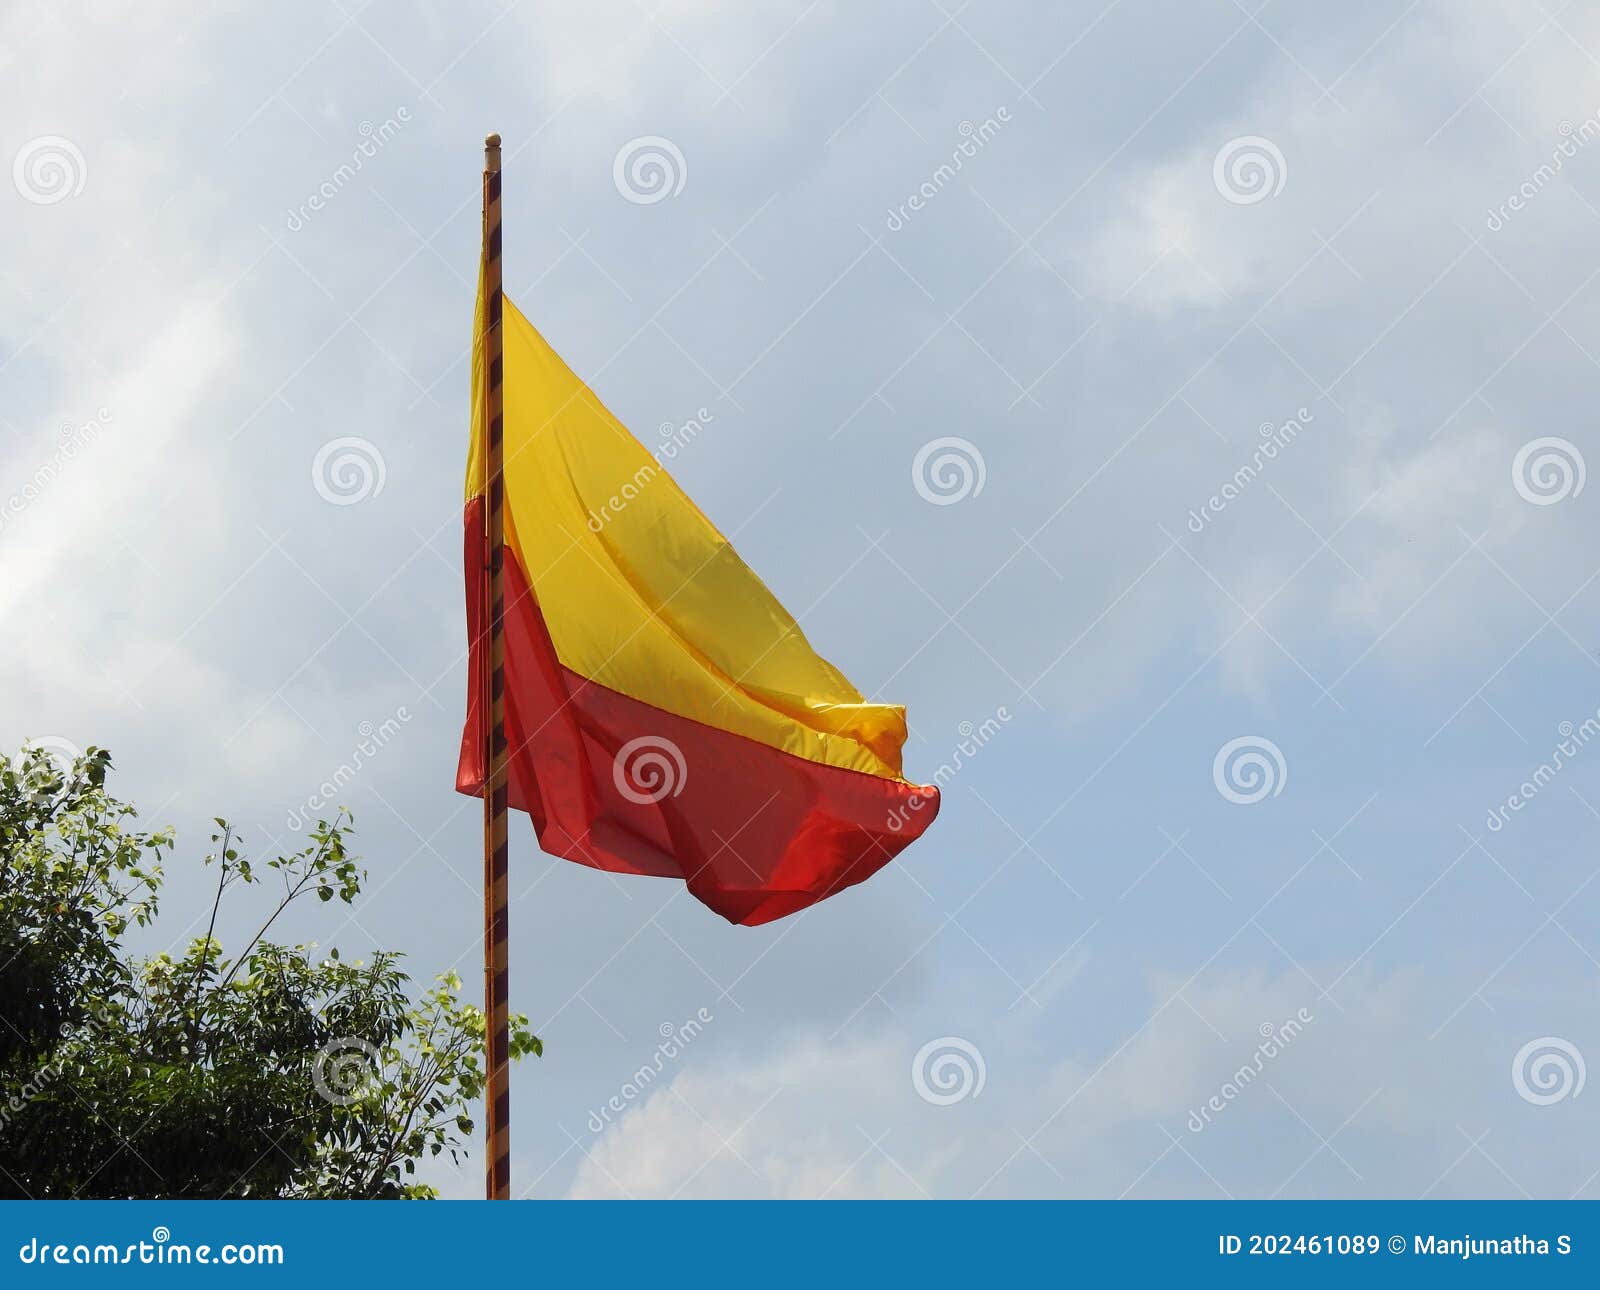 Beautiful Karnataka Yellow and Red Color Flag Waving or Flying in a Sky  Background Stock Image - Image of flying, focus: 202461089